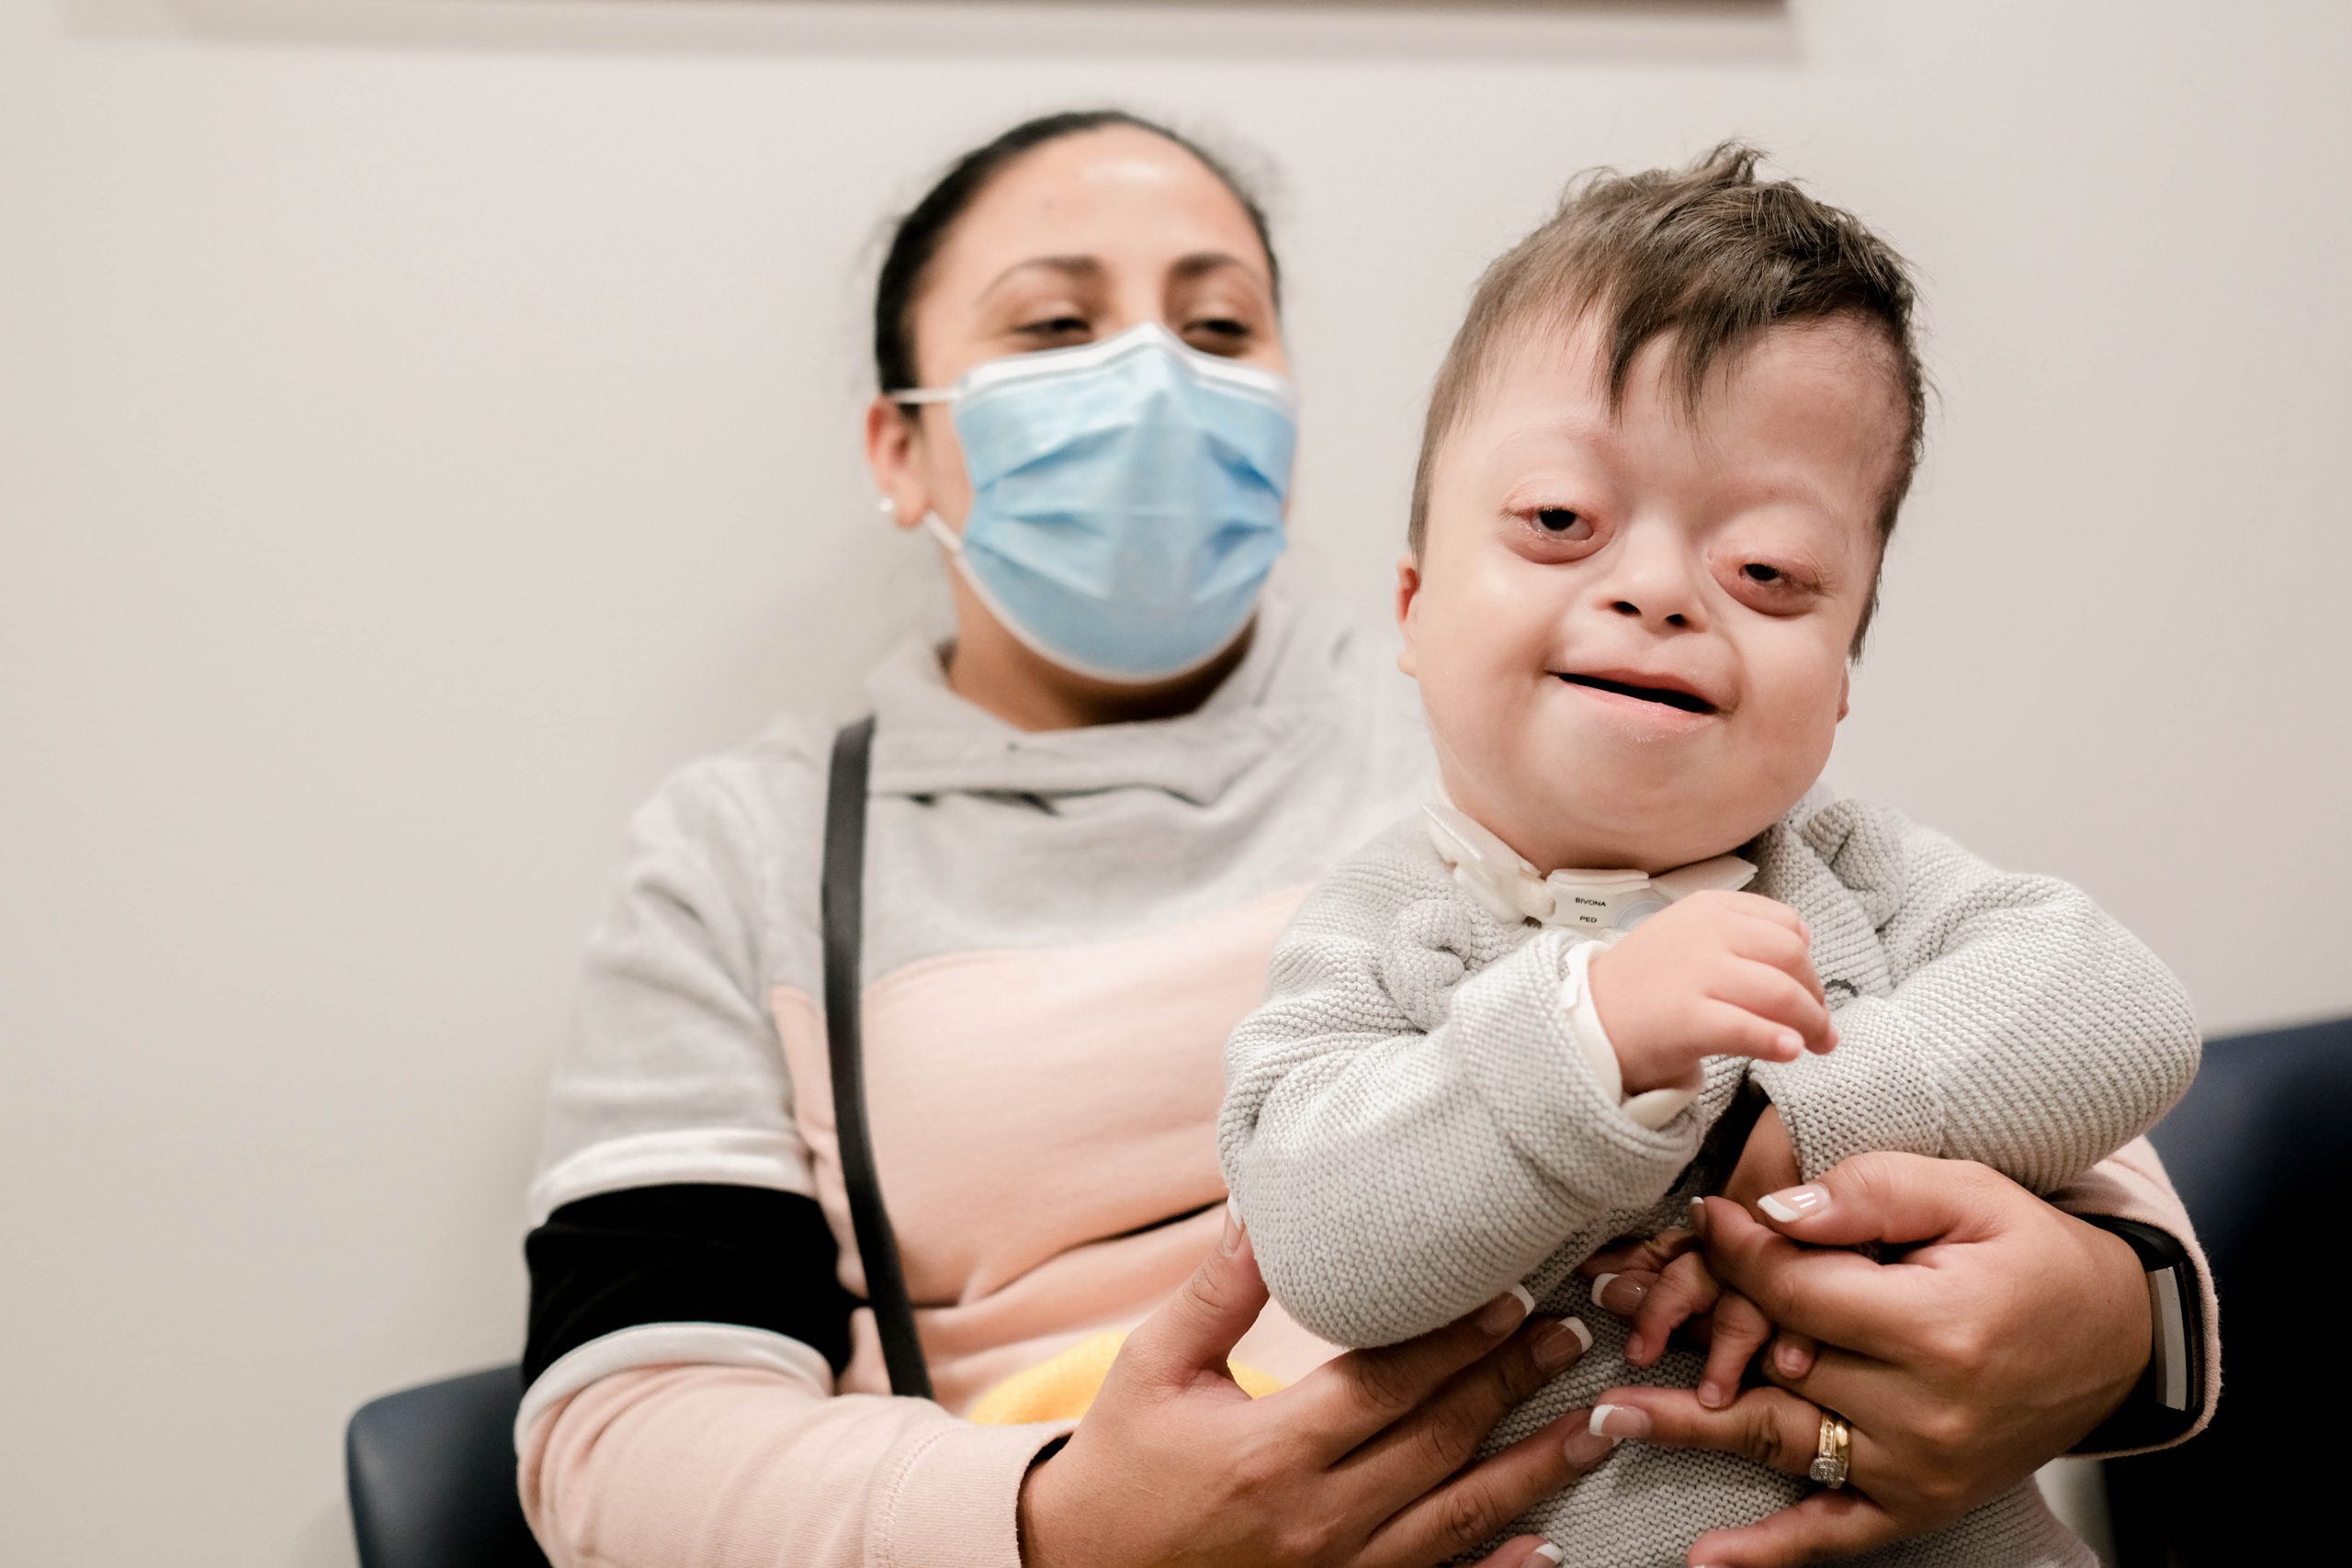 A young boy sits on his mother's lap. She has a medical mask on.